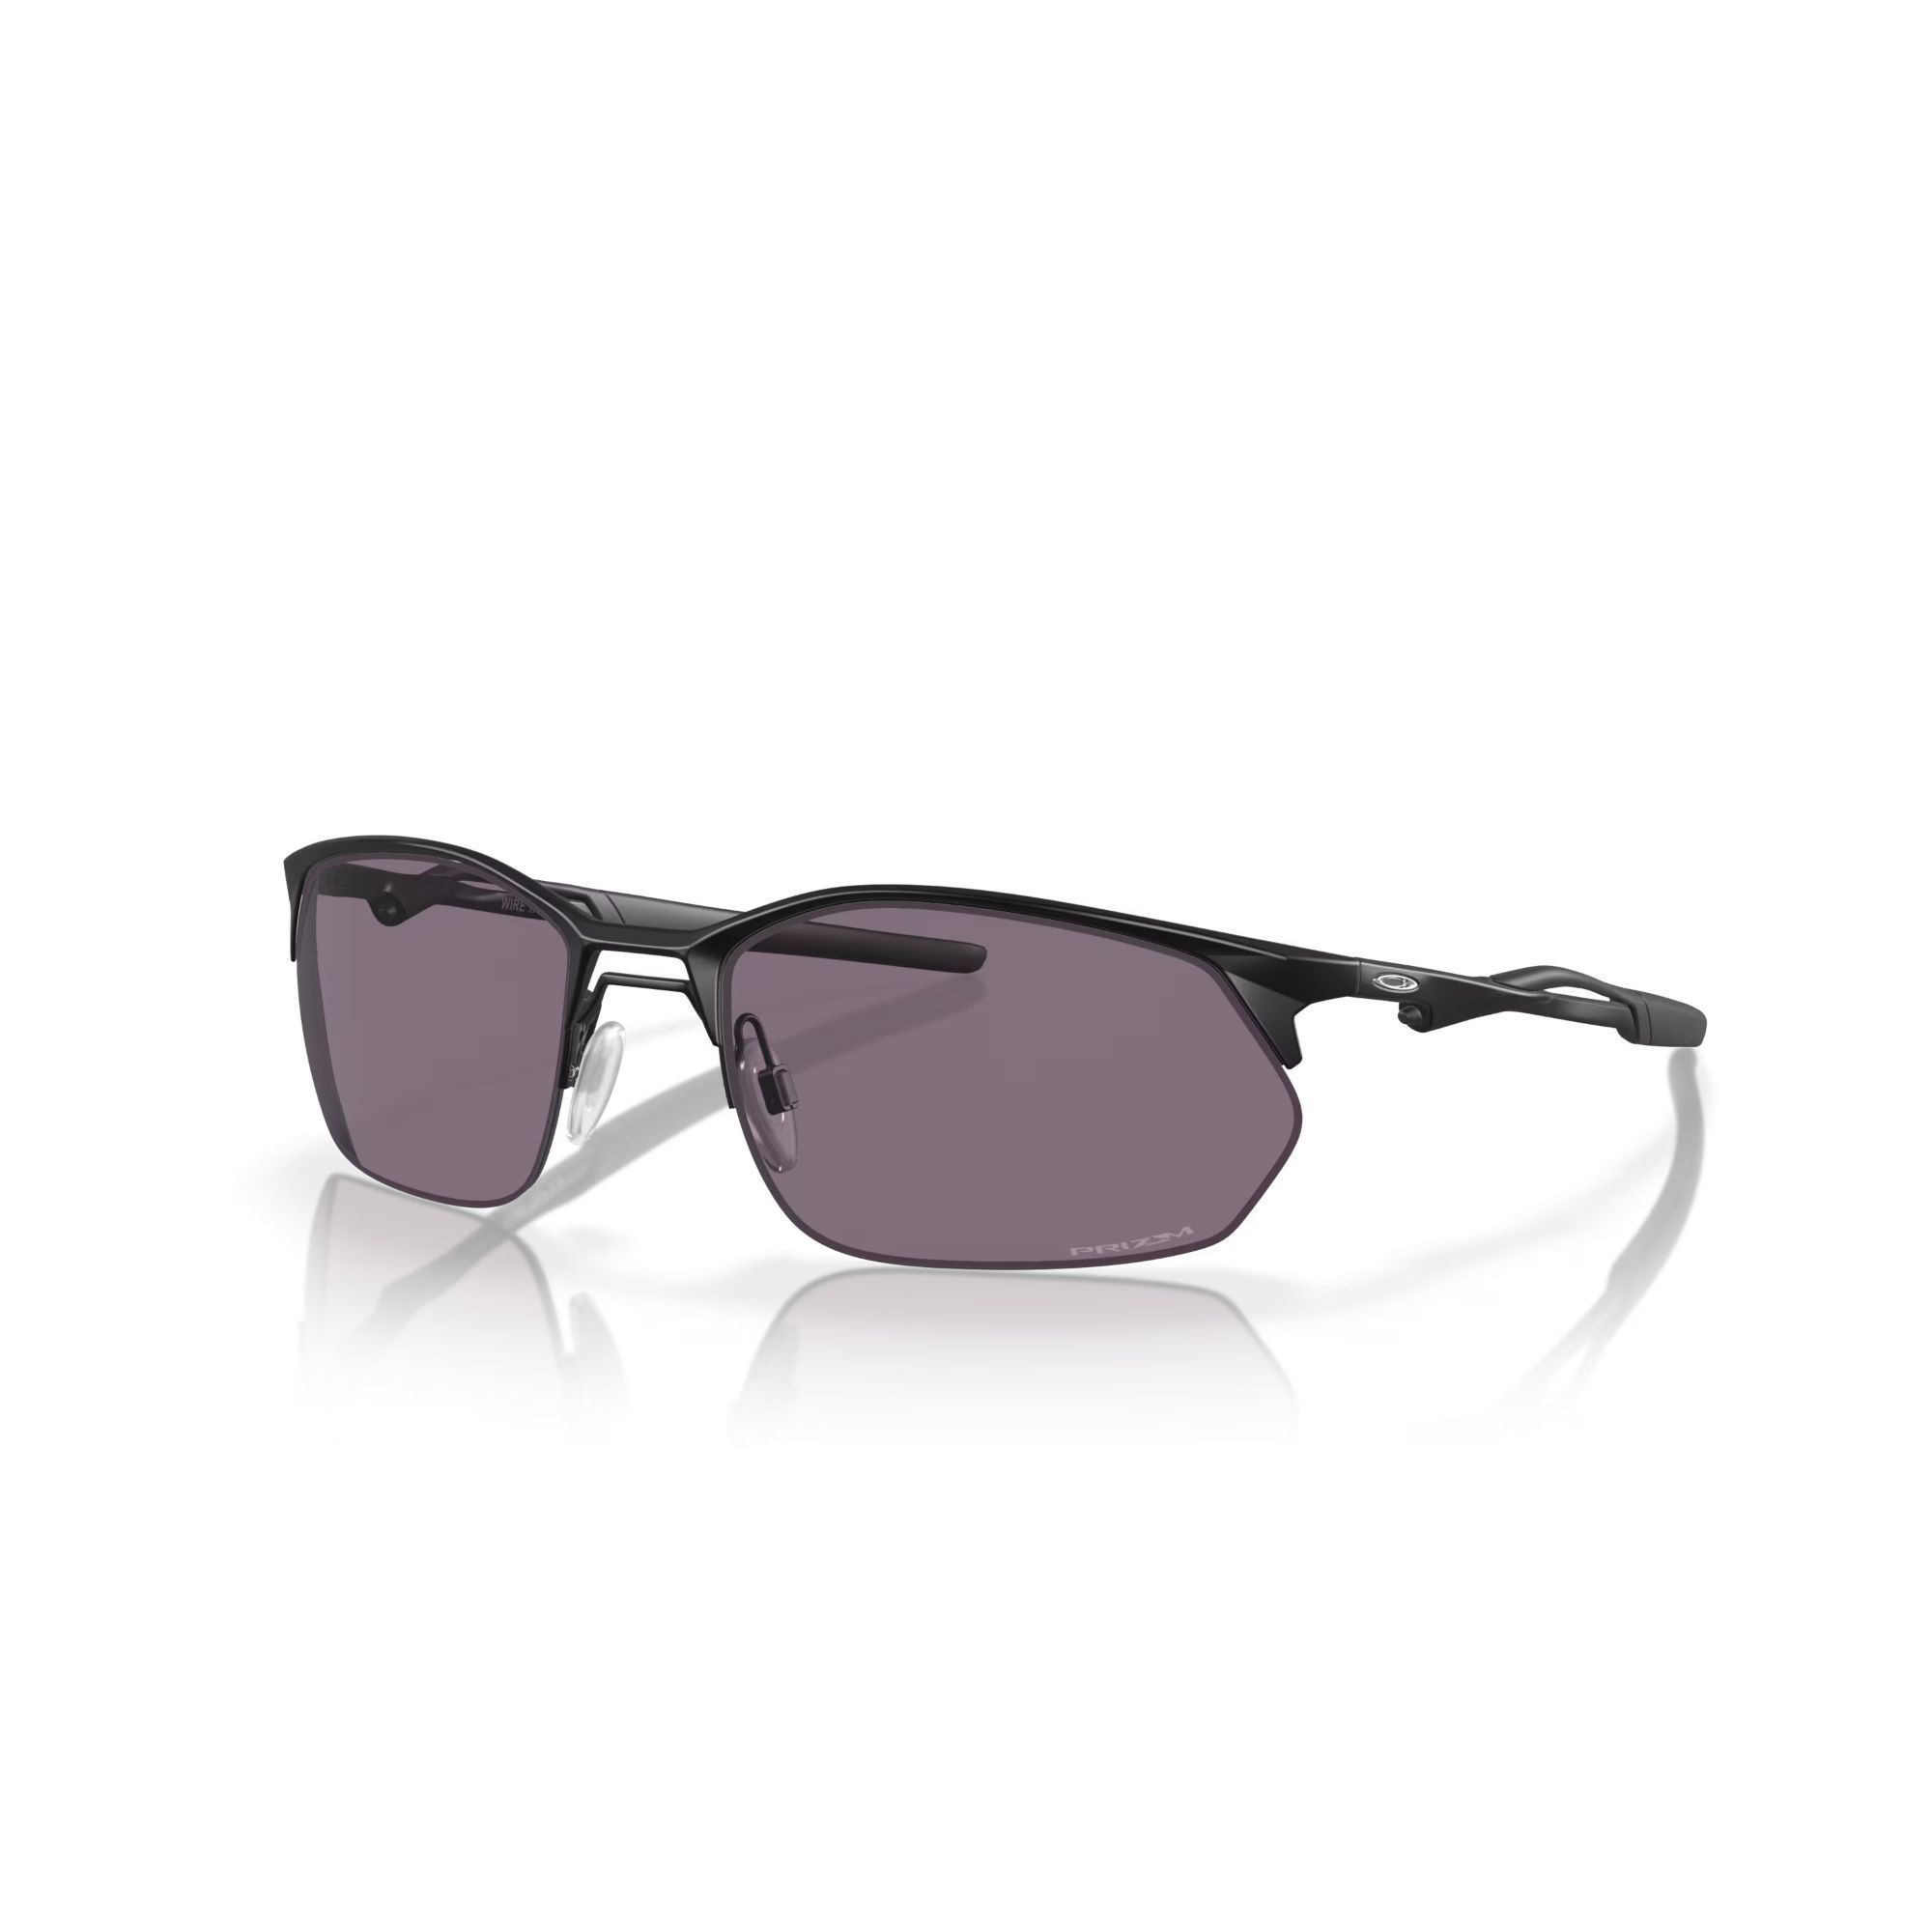 Wire Tap 2.0 Sunglasses OO4145-01 size 60